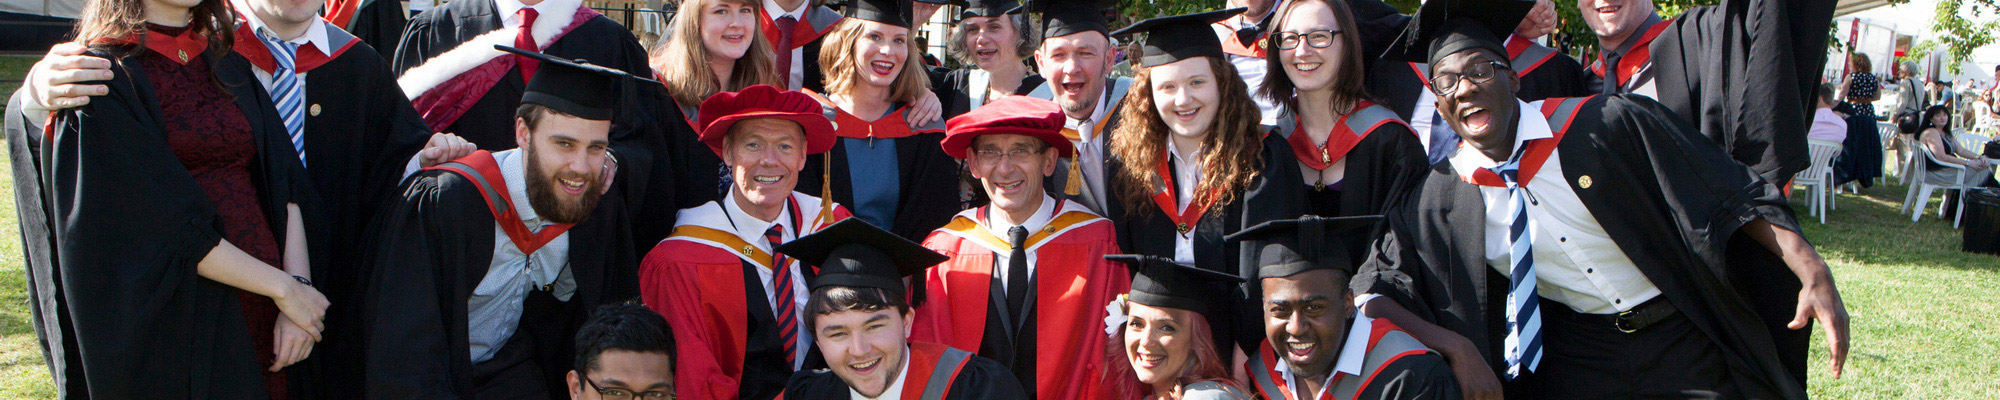 A group of alumni celebrating their graduation from Staffordshire University